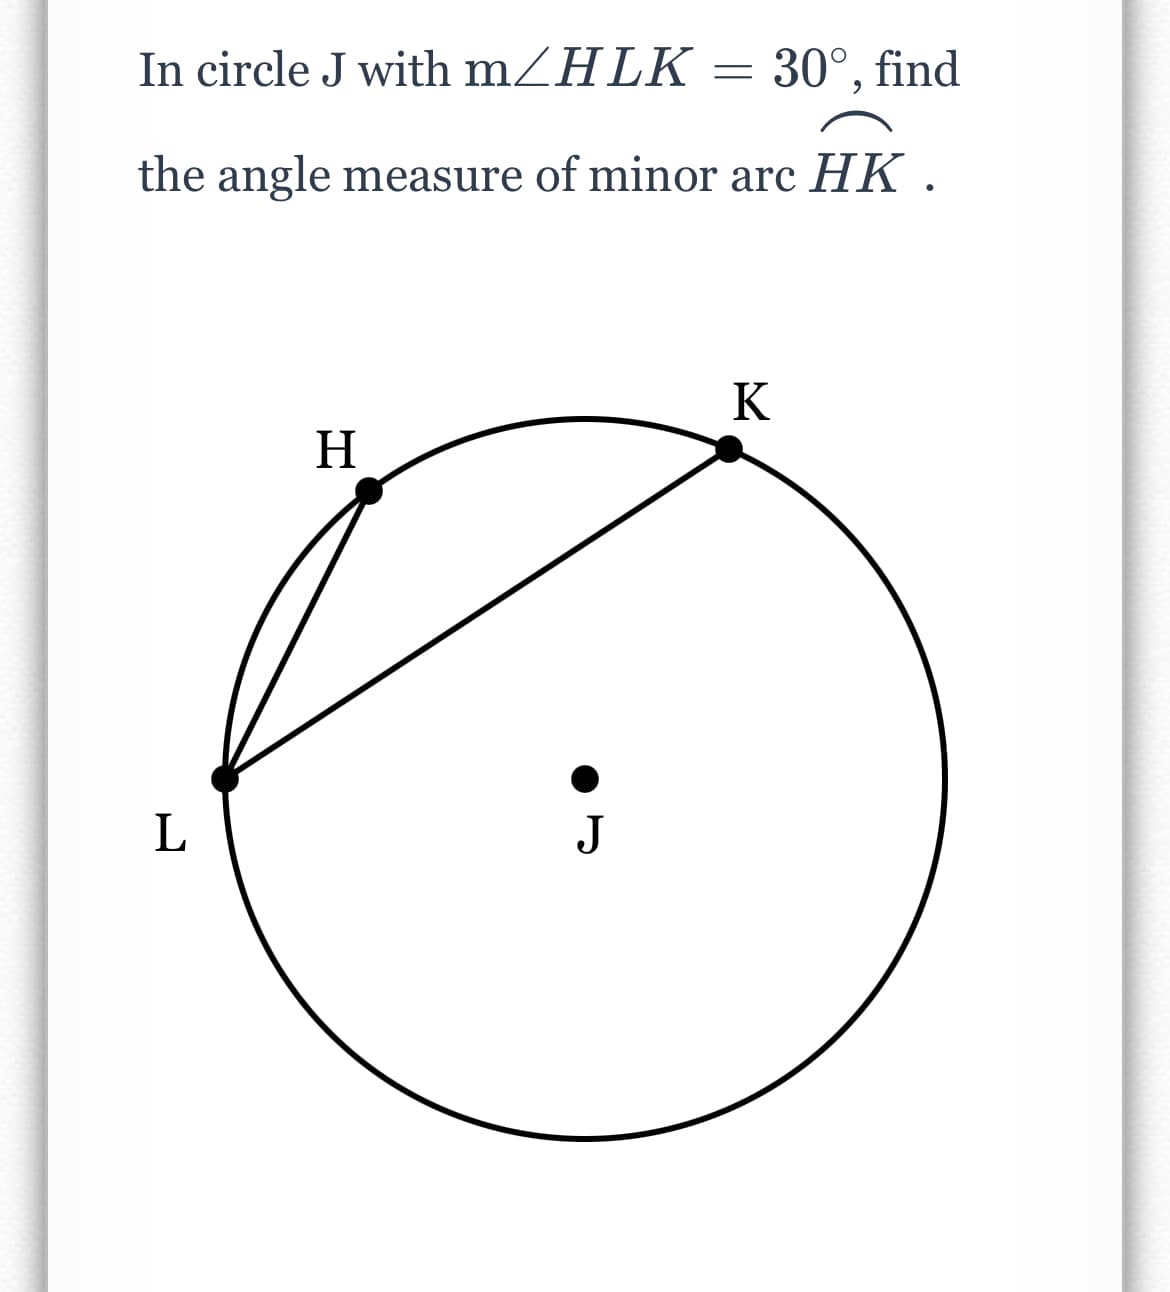 In circle J with mZHLK
30°, find
the angle measure of minor arc HK .
K
H
L
J
